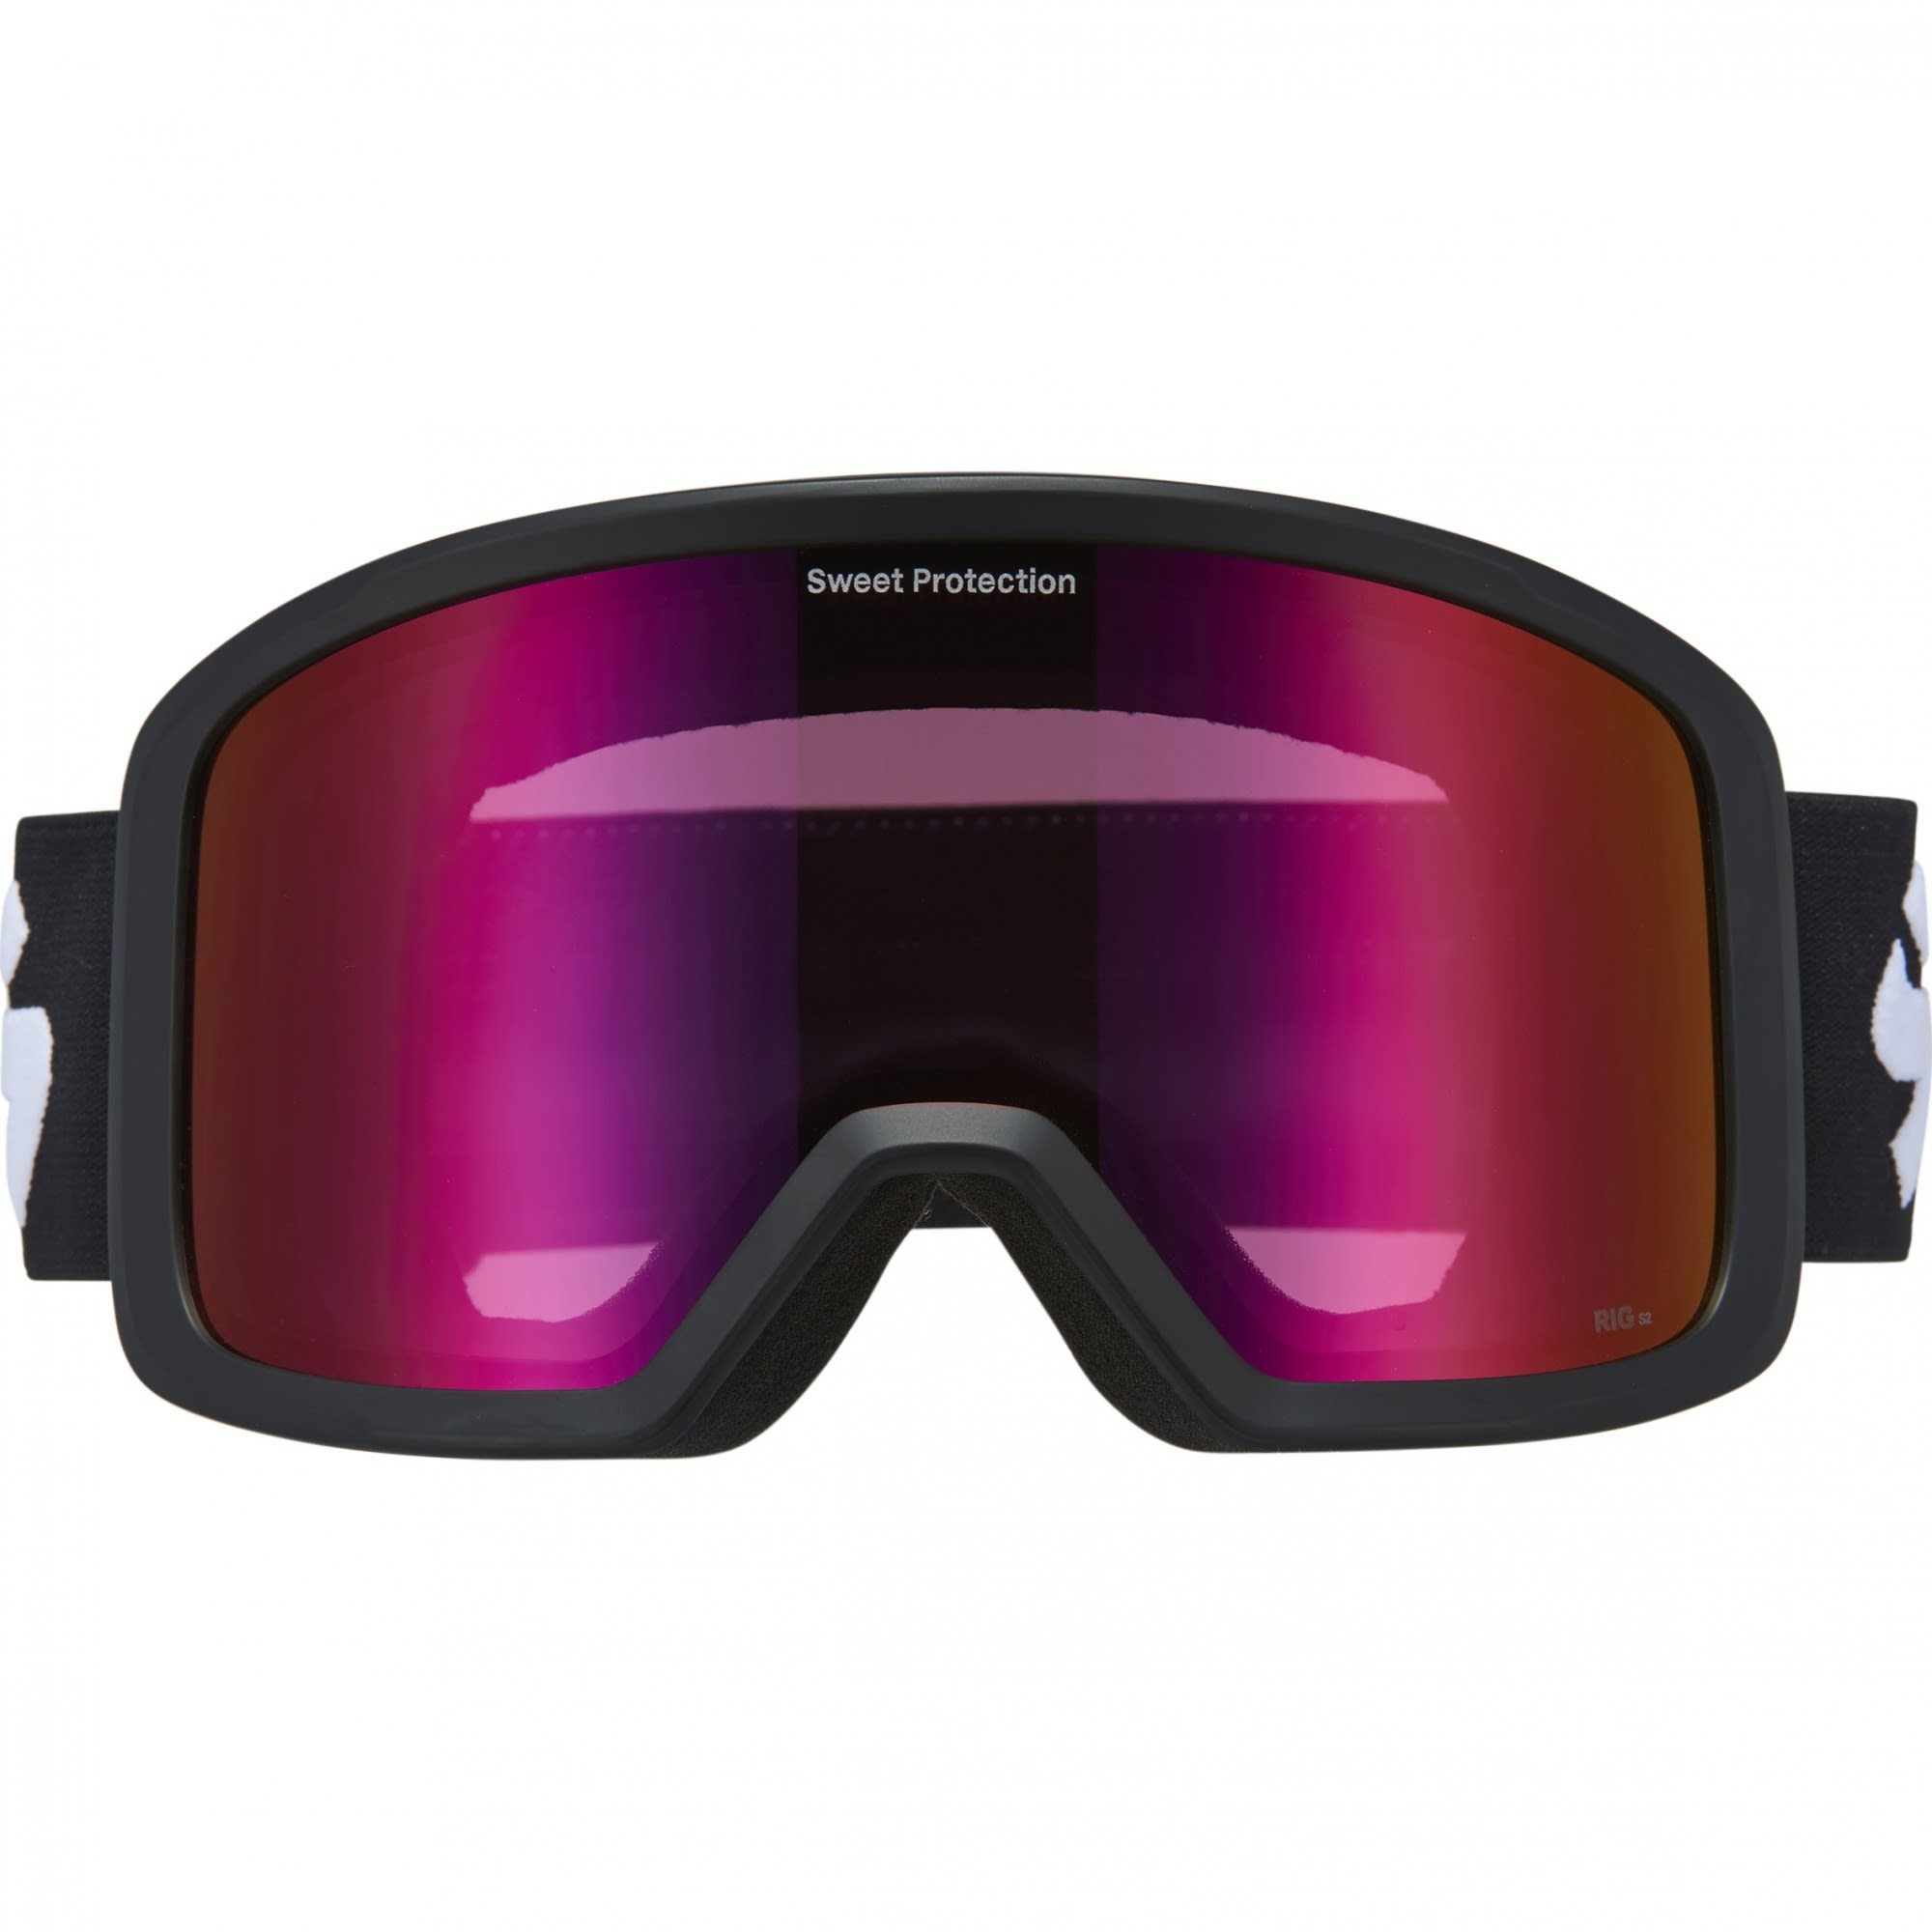 Rig Firewall Protection Sweet Accessoires Protection Skibrille Reflect Sweet